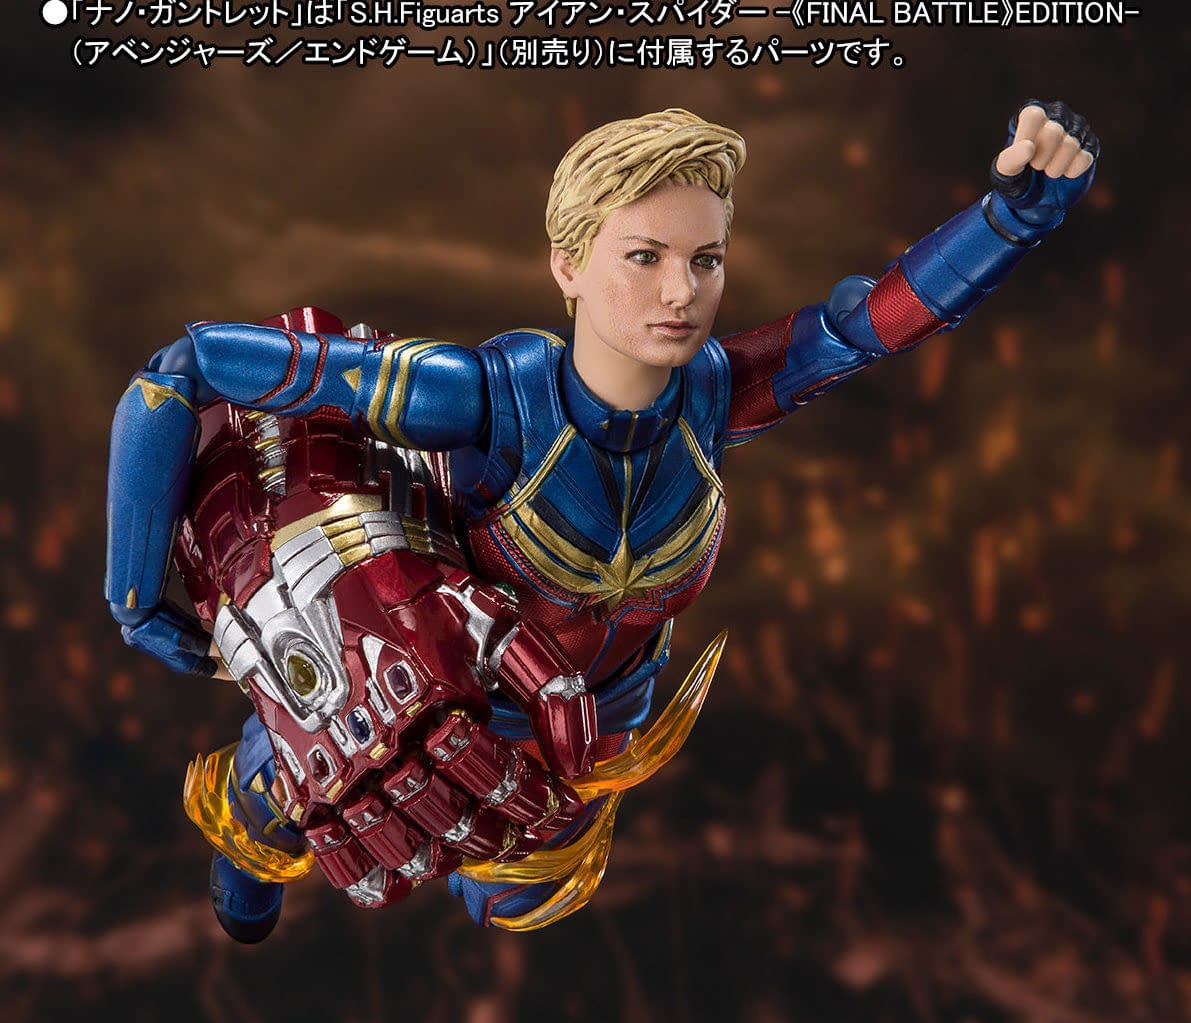 Captain Marvel Flies on in with the New S.H. Figuarts Figure.